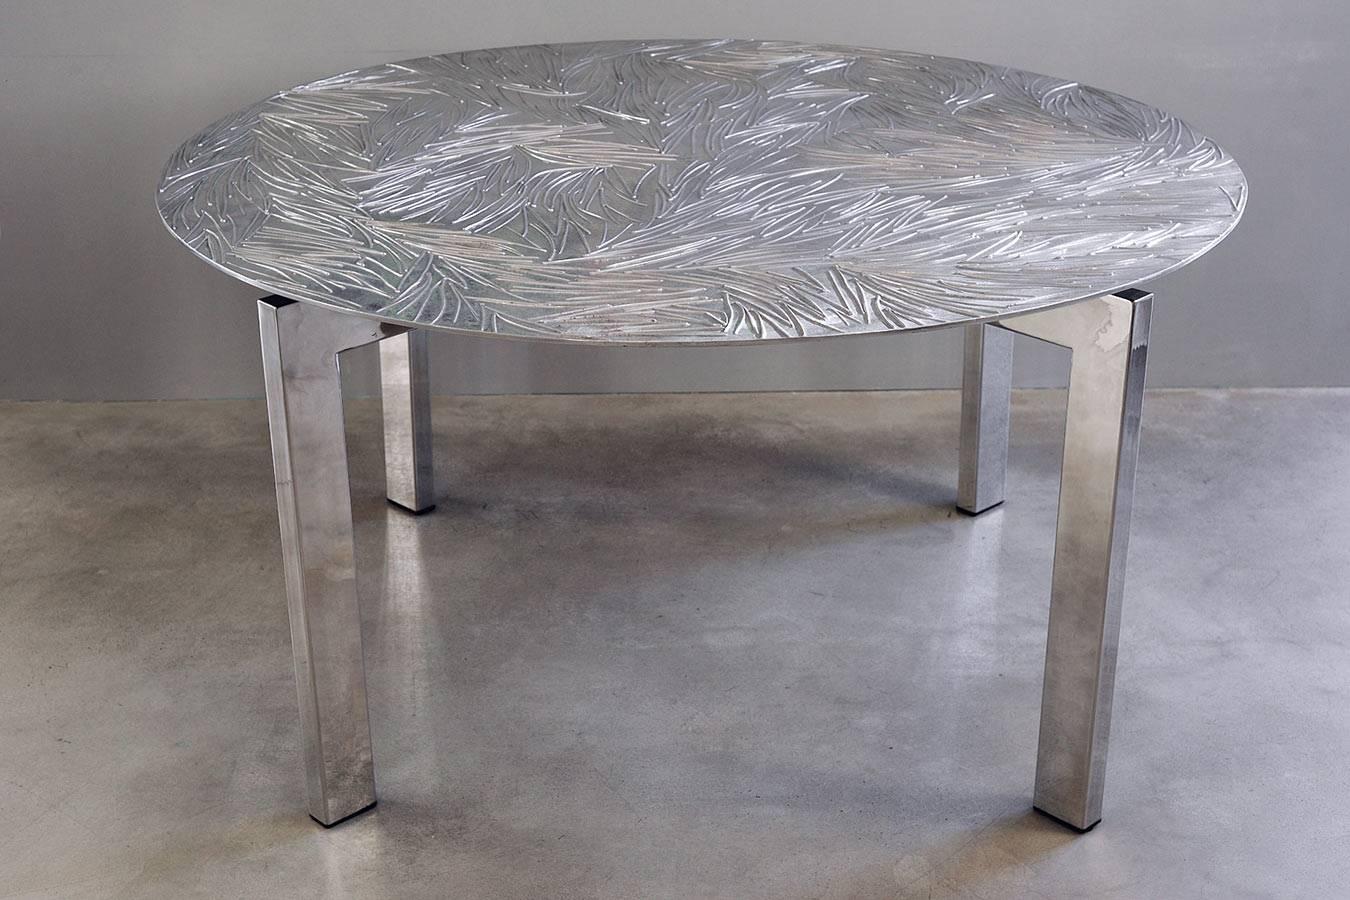 Limited Edition for the table with an aluminum cast top and mirror polished steel legs designed and made by the designer and sculptor Andrea Salvetti. 
A collection piece for artistic design lovers that conveys class and sophistication to the